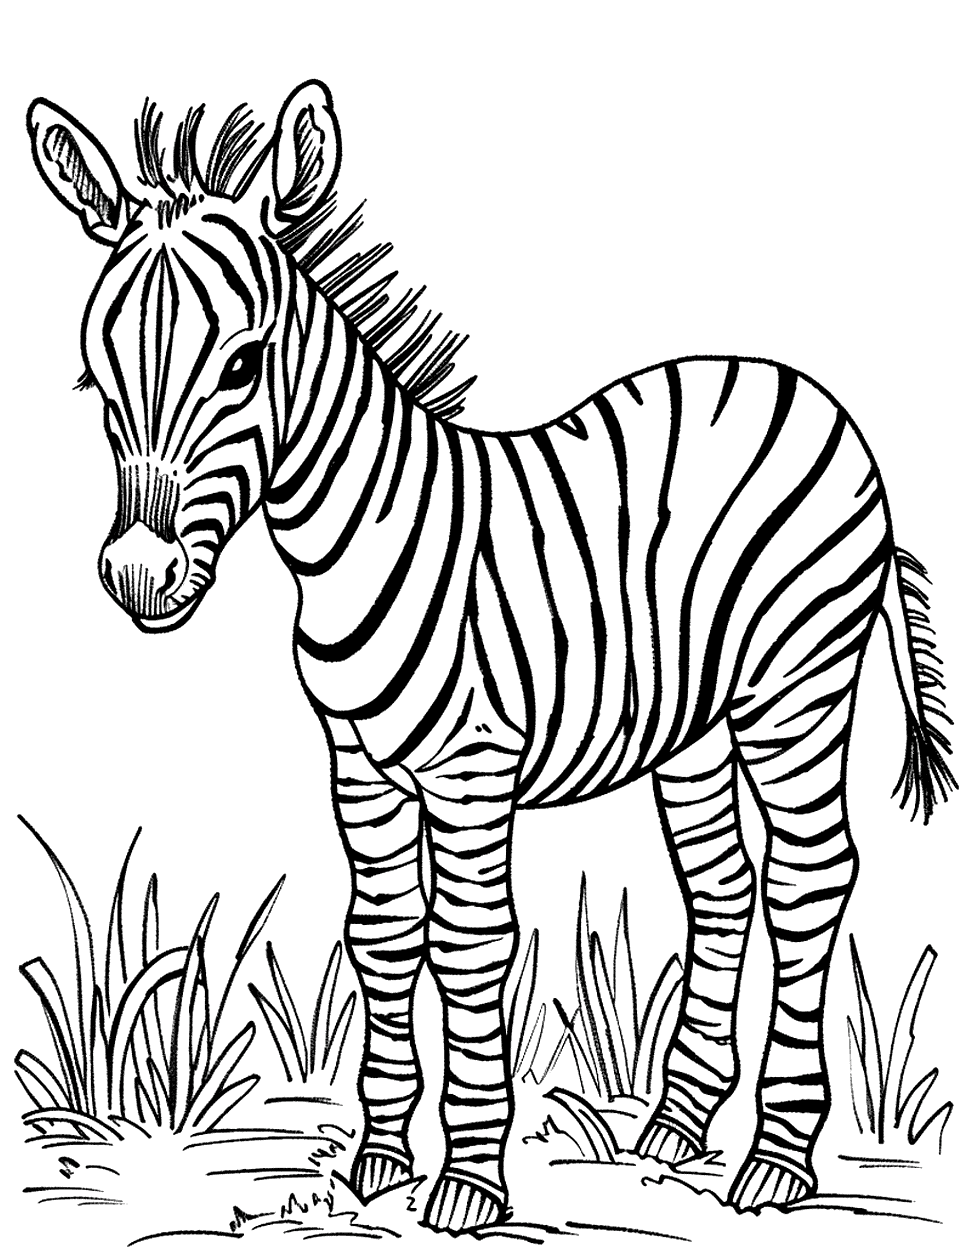 Baby Zebra Coloring Page - A young zebra standing in a grassy field.